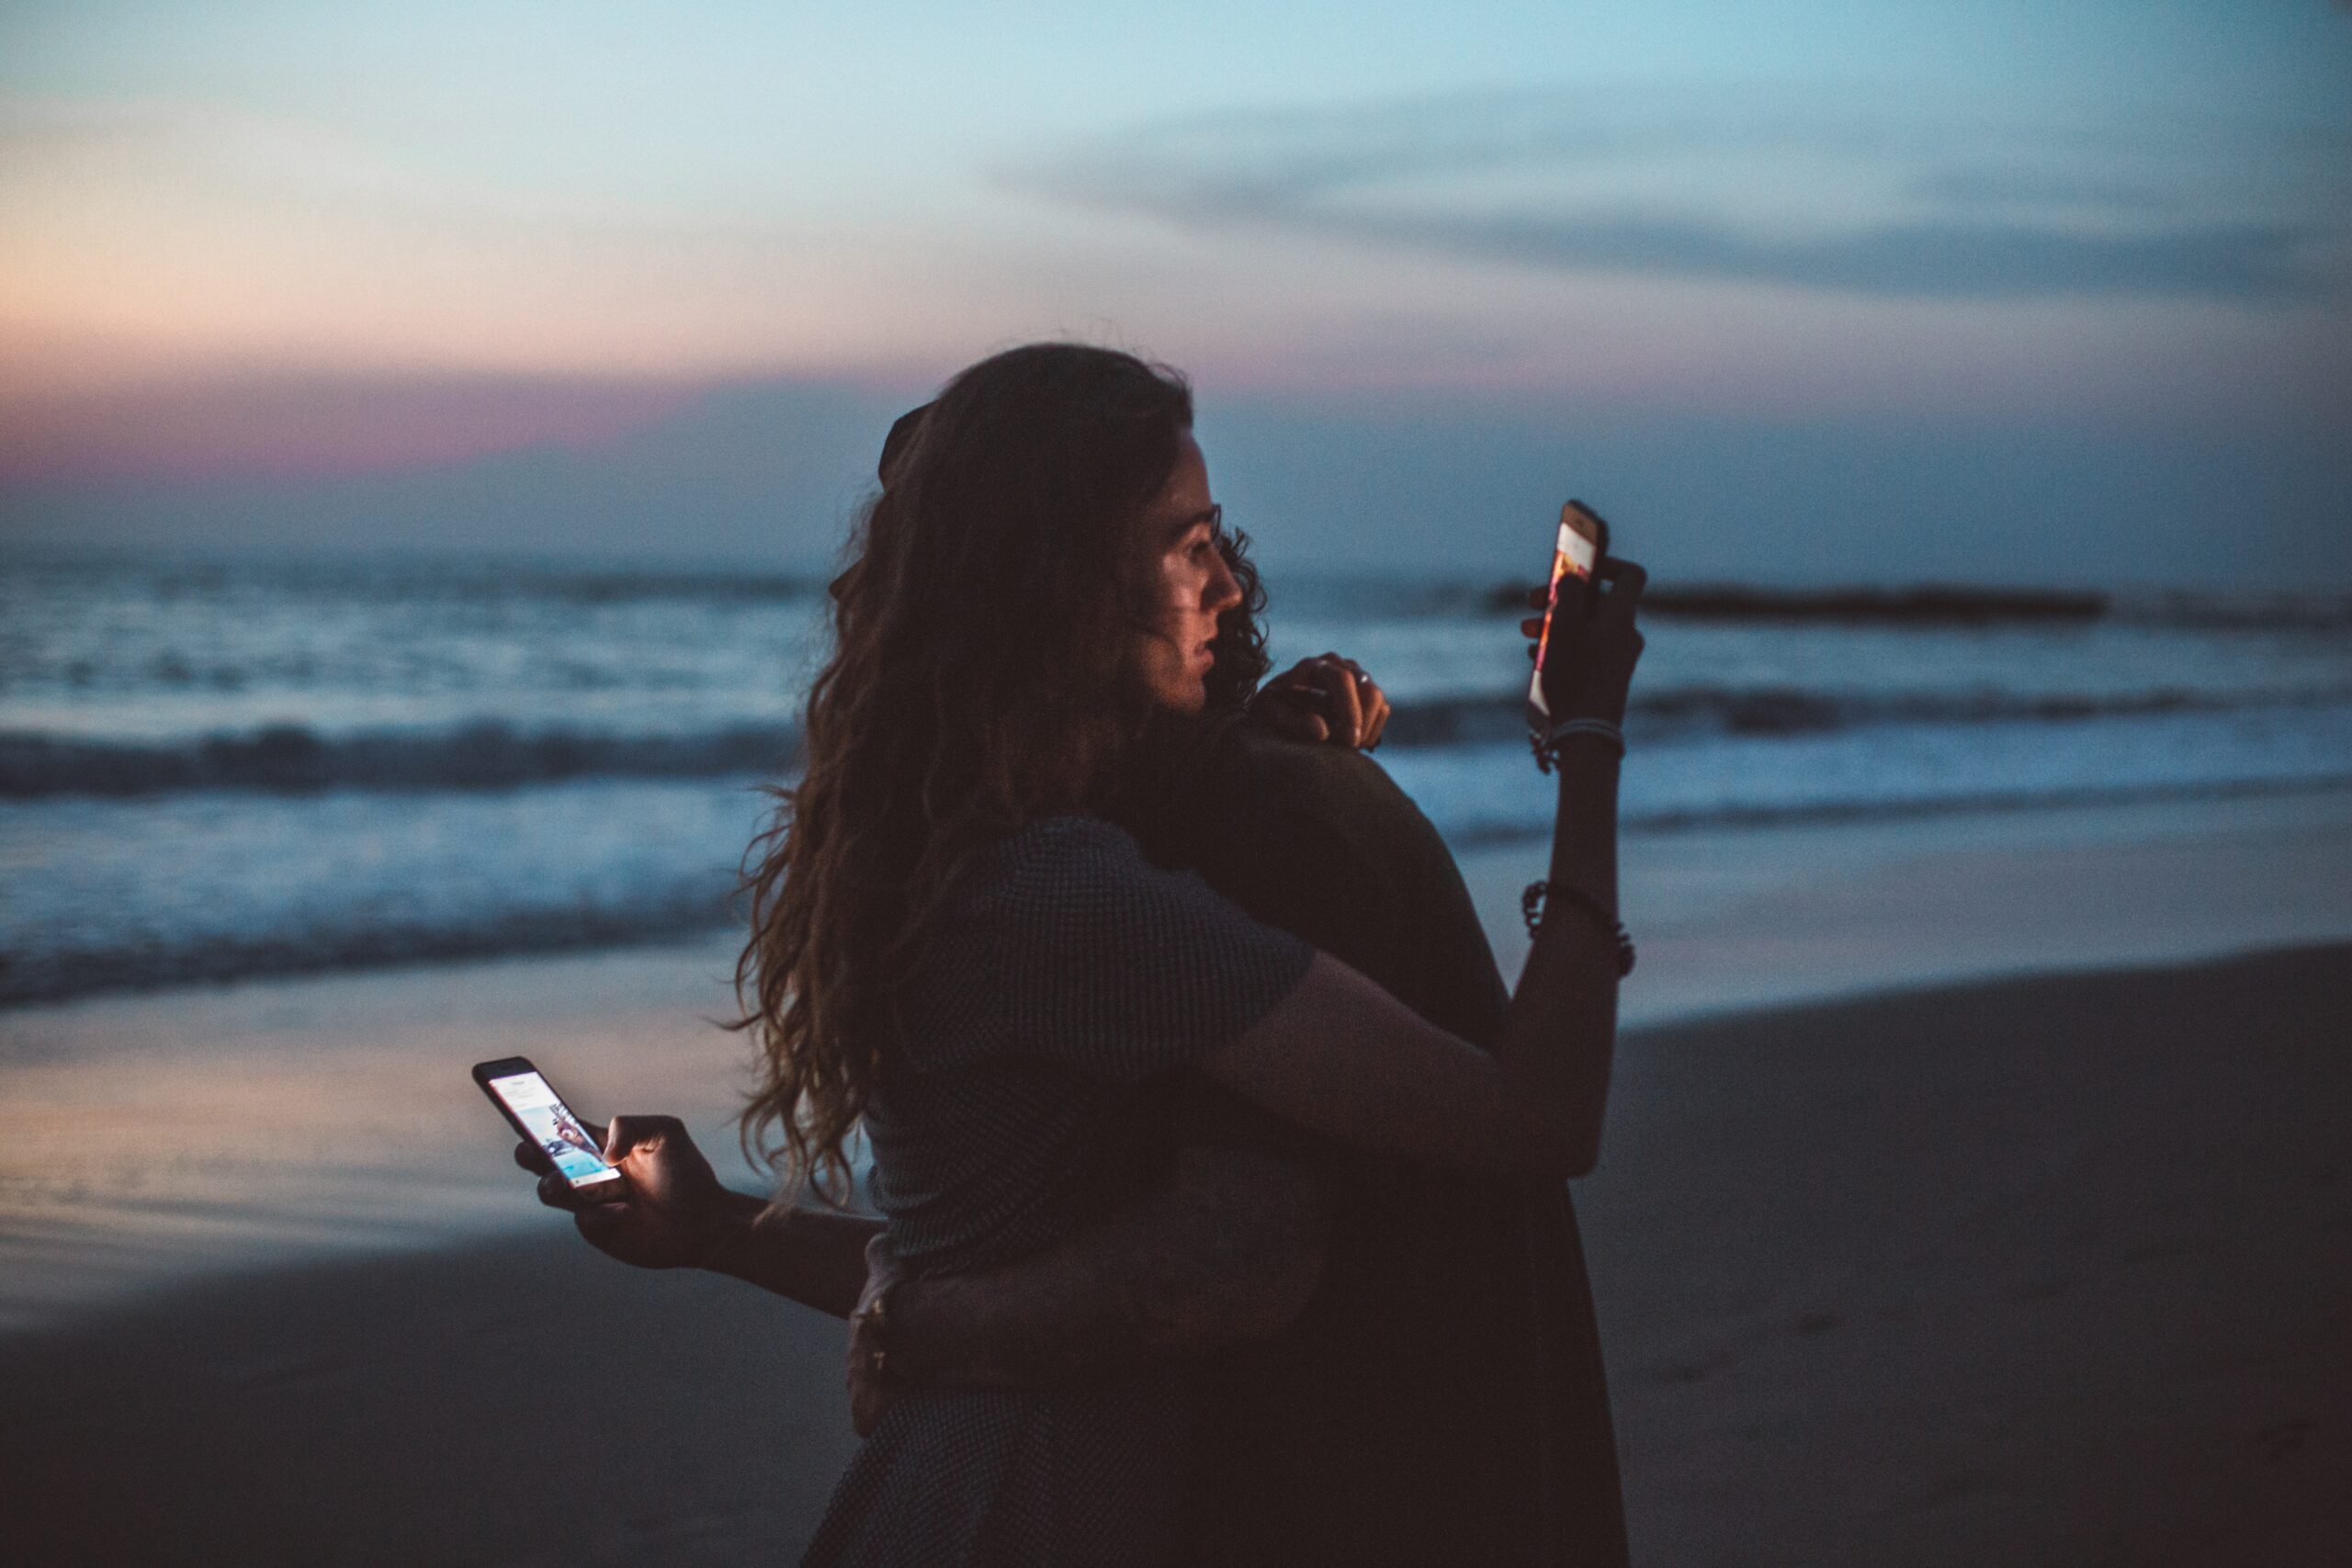 Challenges of Romantic Relationships in the Digital Age